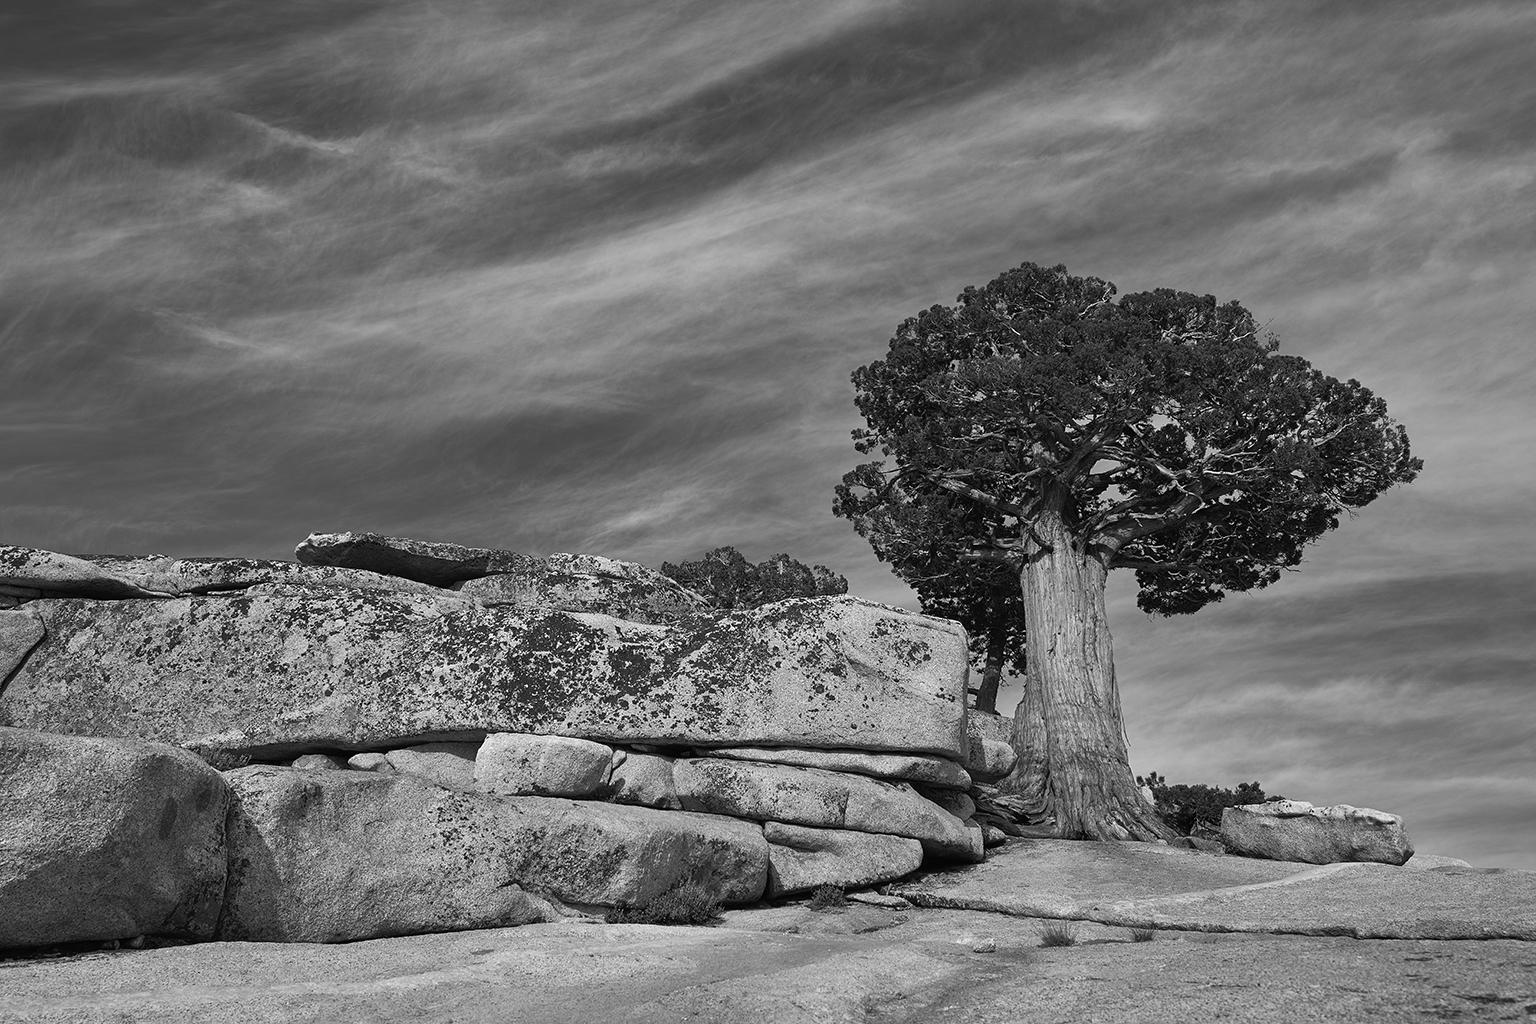 Tree Study IV - large format b/w photograph of lone ancient tree in landscape